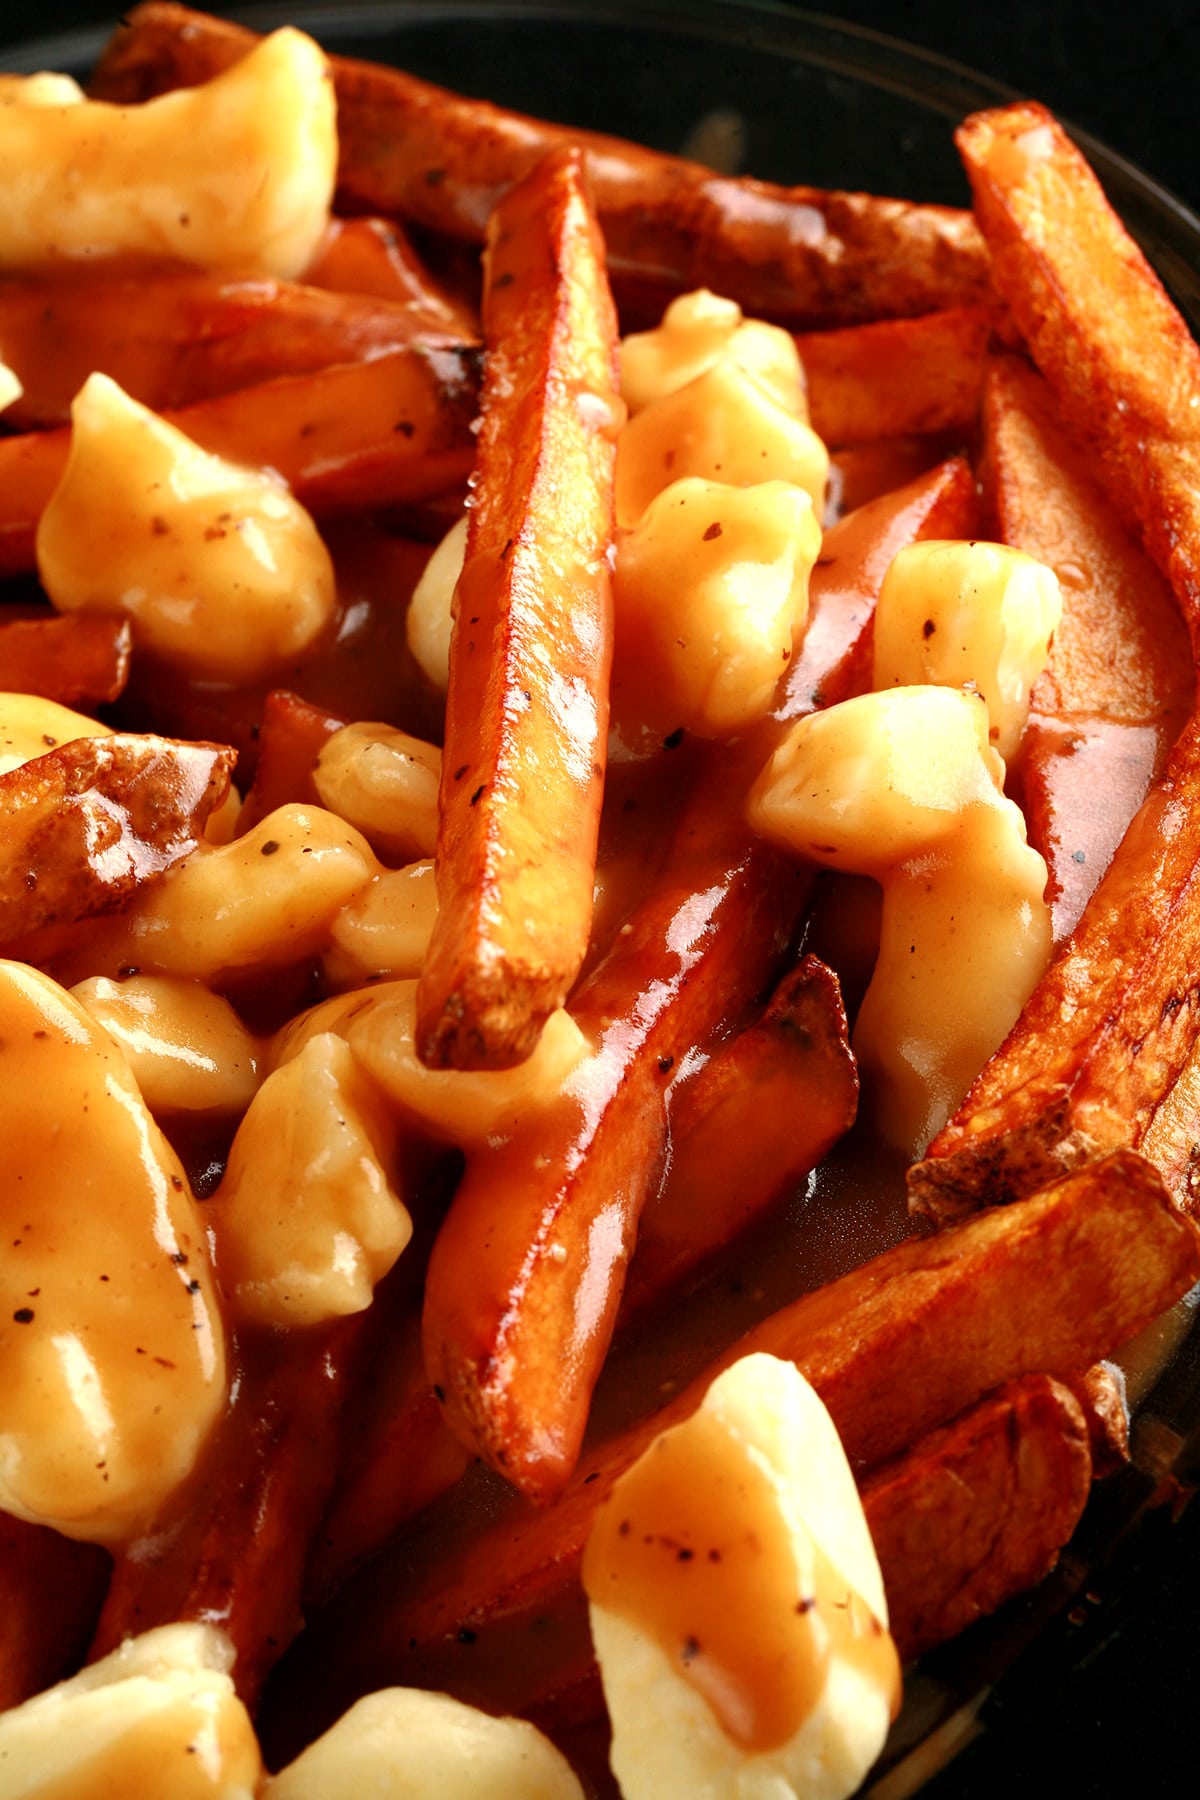 A close up view of poutine - fries, white cheese curds, and gravy.